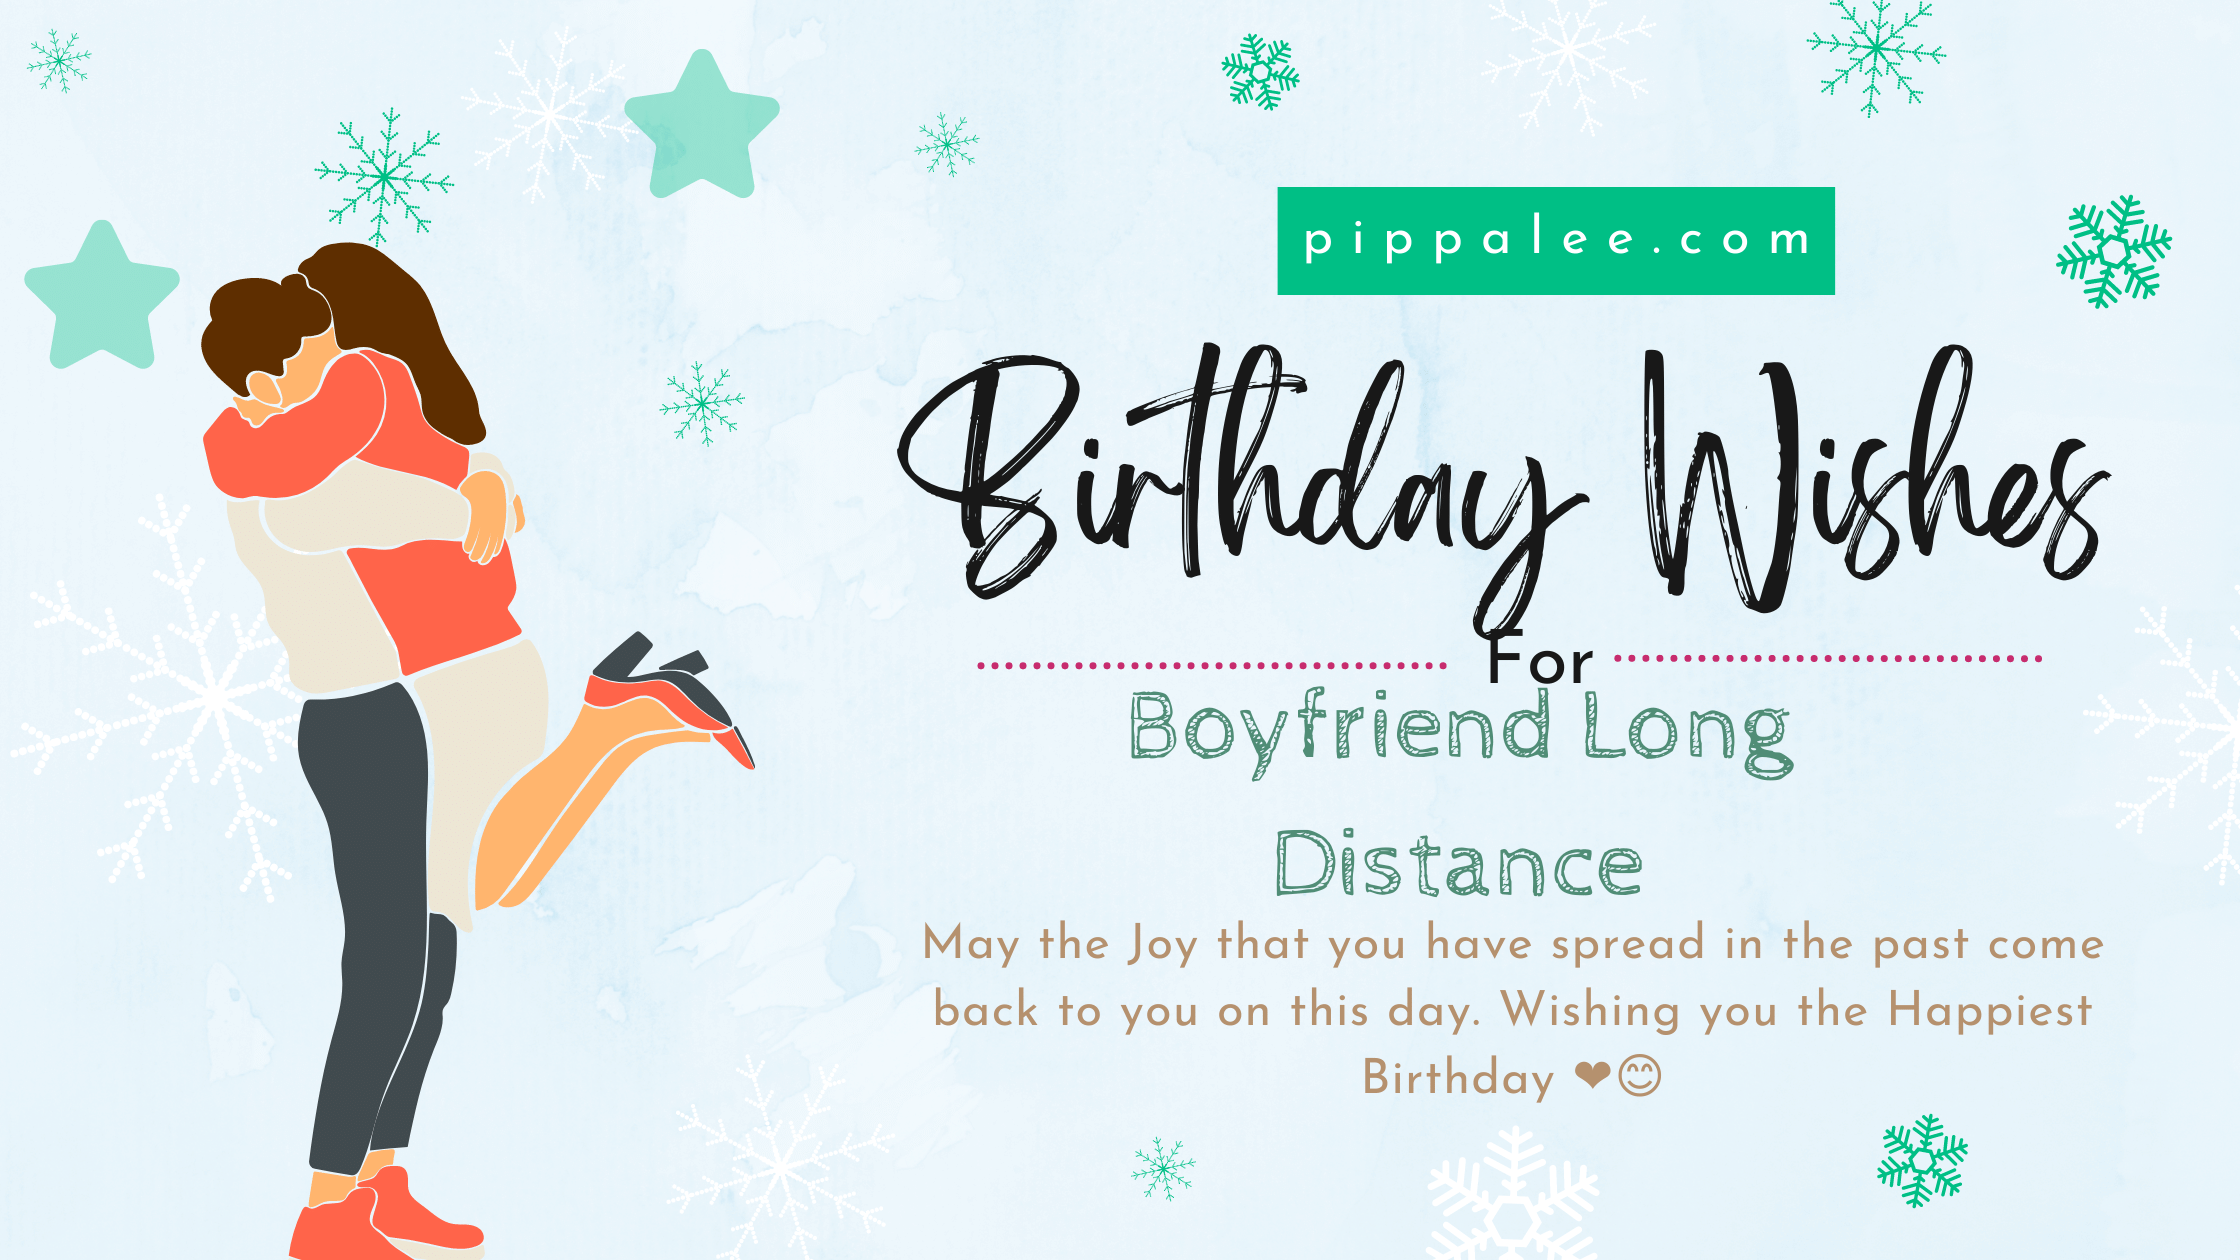 Birthday Wishes for Boyfriend Long Distance - Wishes & Messages